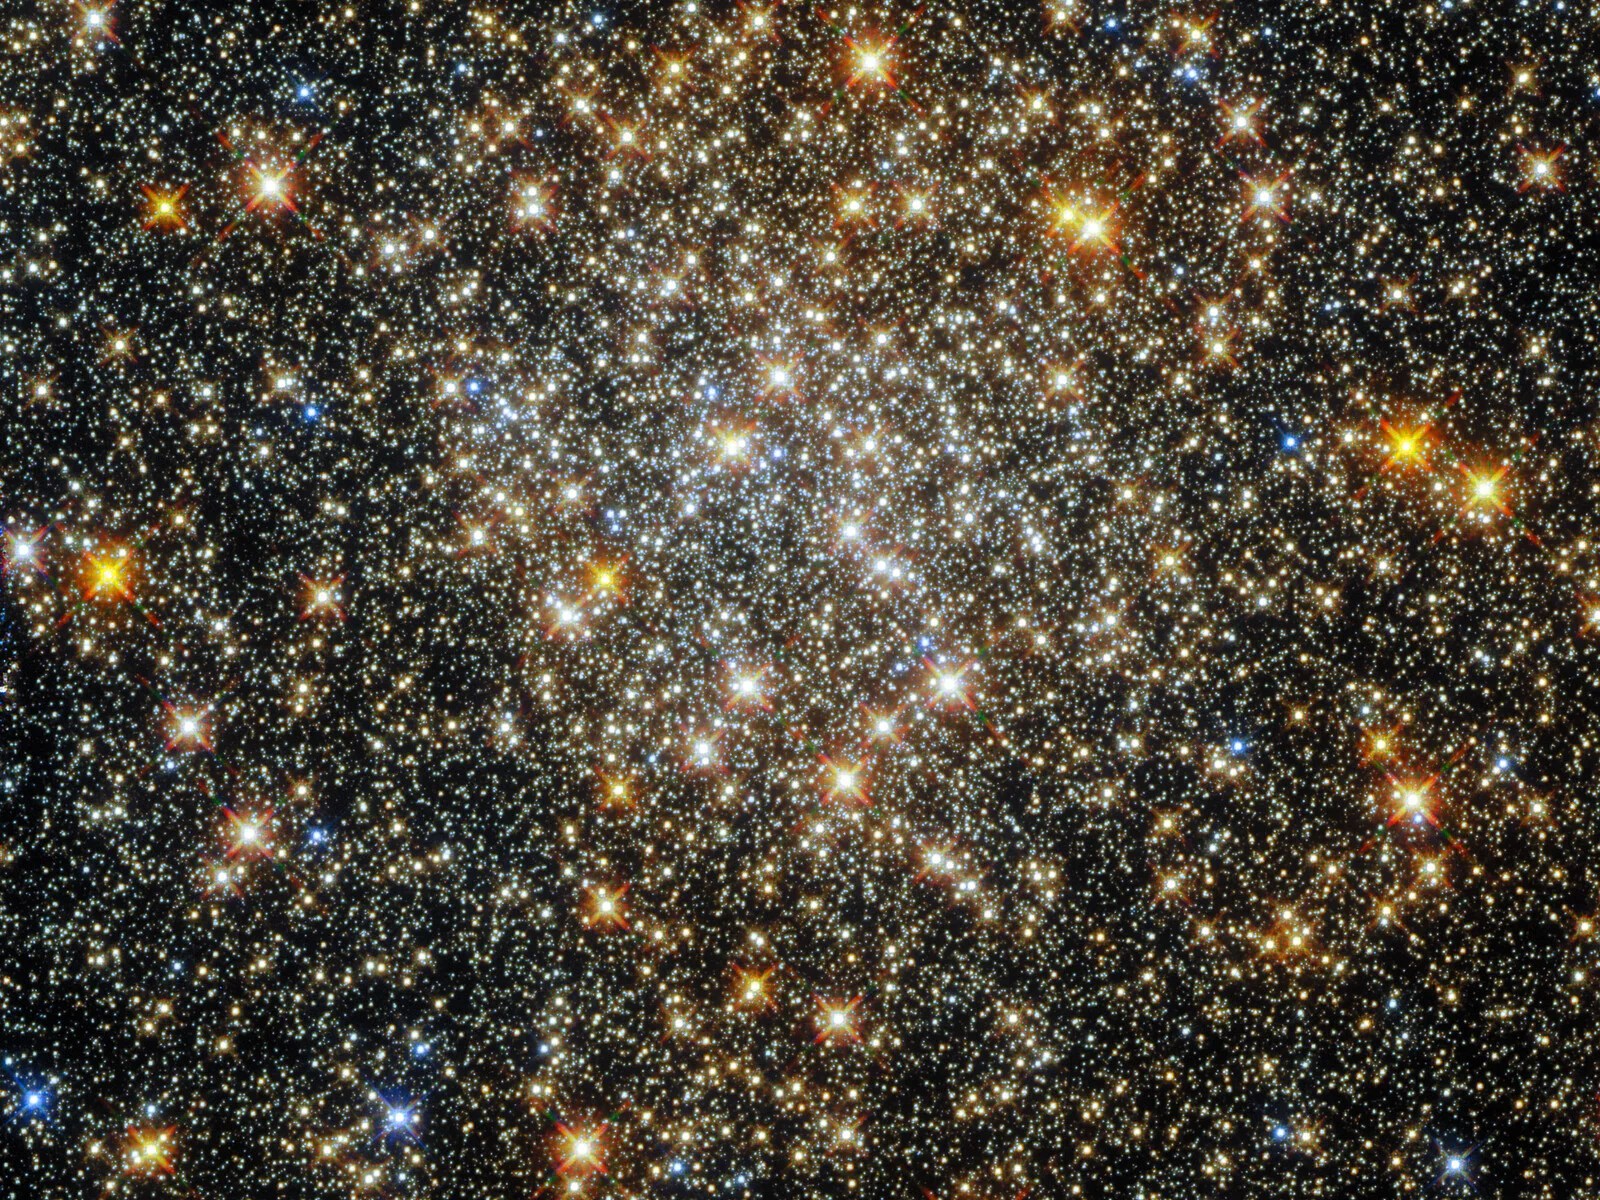 This sparkling starfield, captured by the nasa/esa hubble space telescope’s wide field camera 3 and advanced camera for surveys, contains the globular cluster eso 520-21 (also known as palomar 6).